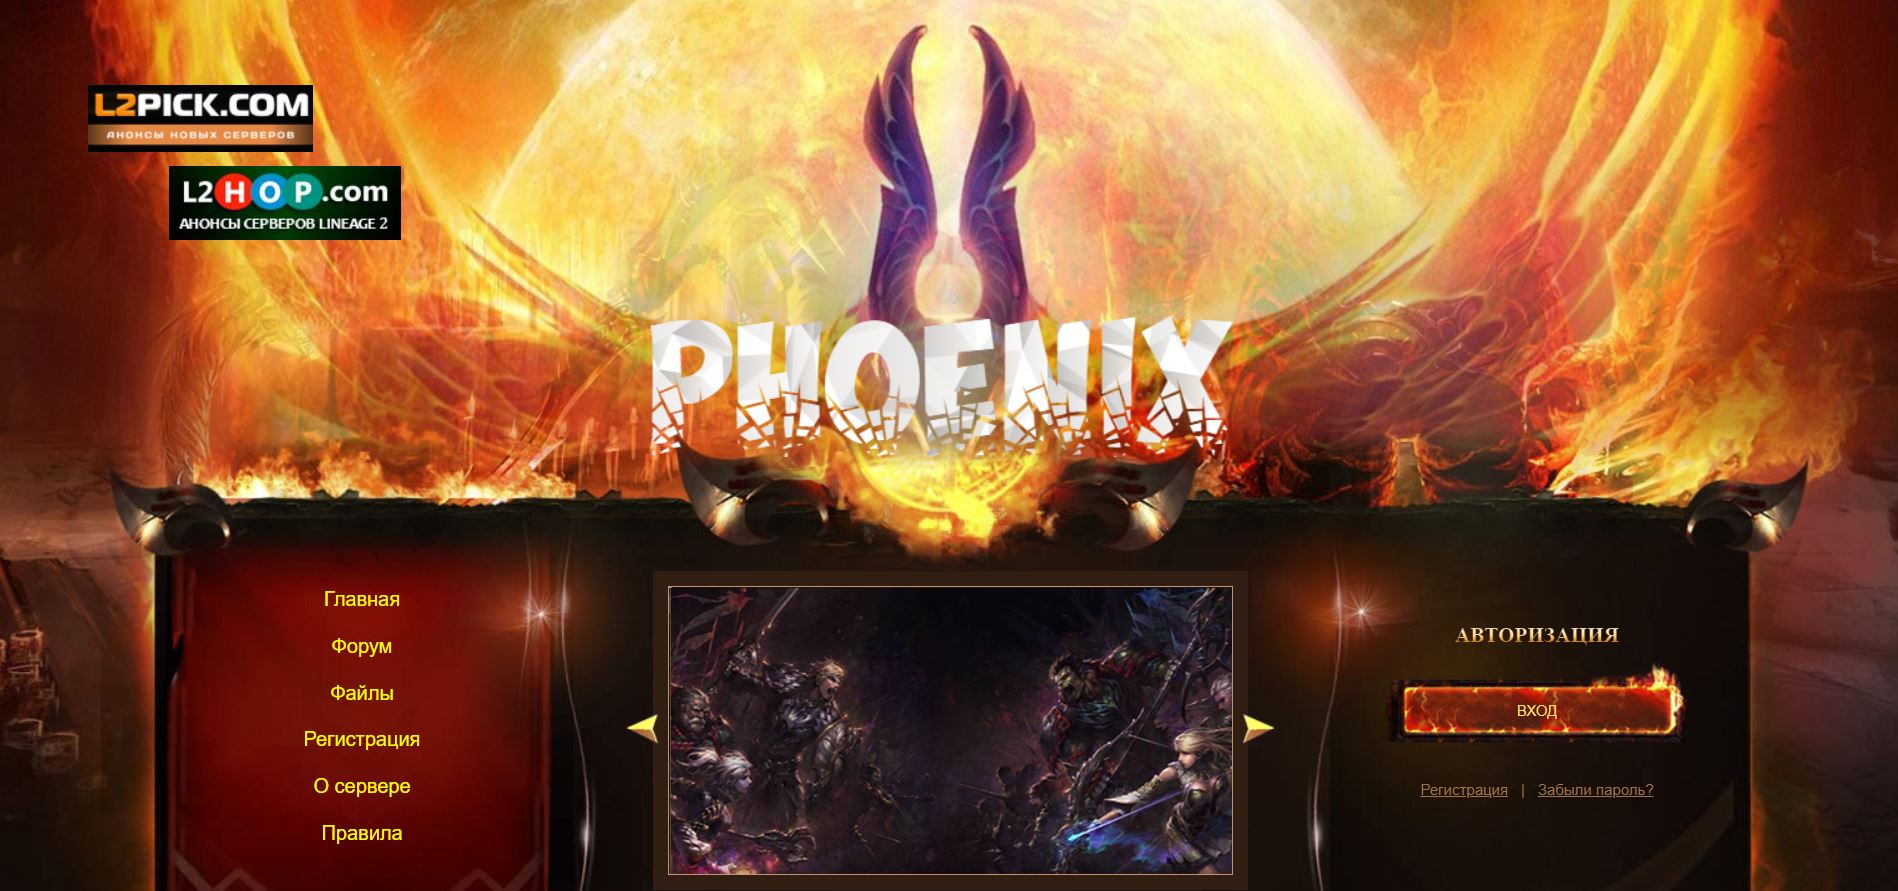 🔥 Rebirth of Power and Glory! Lineage 2 Interlude x100 on PhoenixL2: Become the Phoenix of Victory! ⚔️🌅